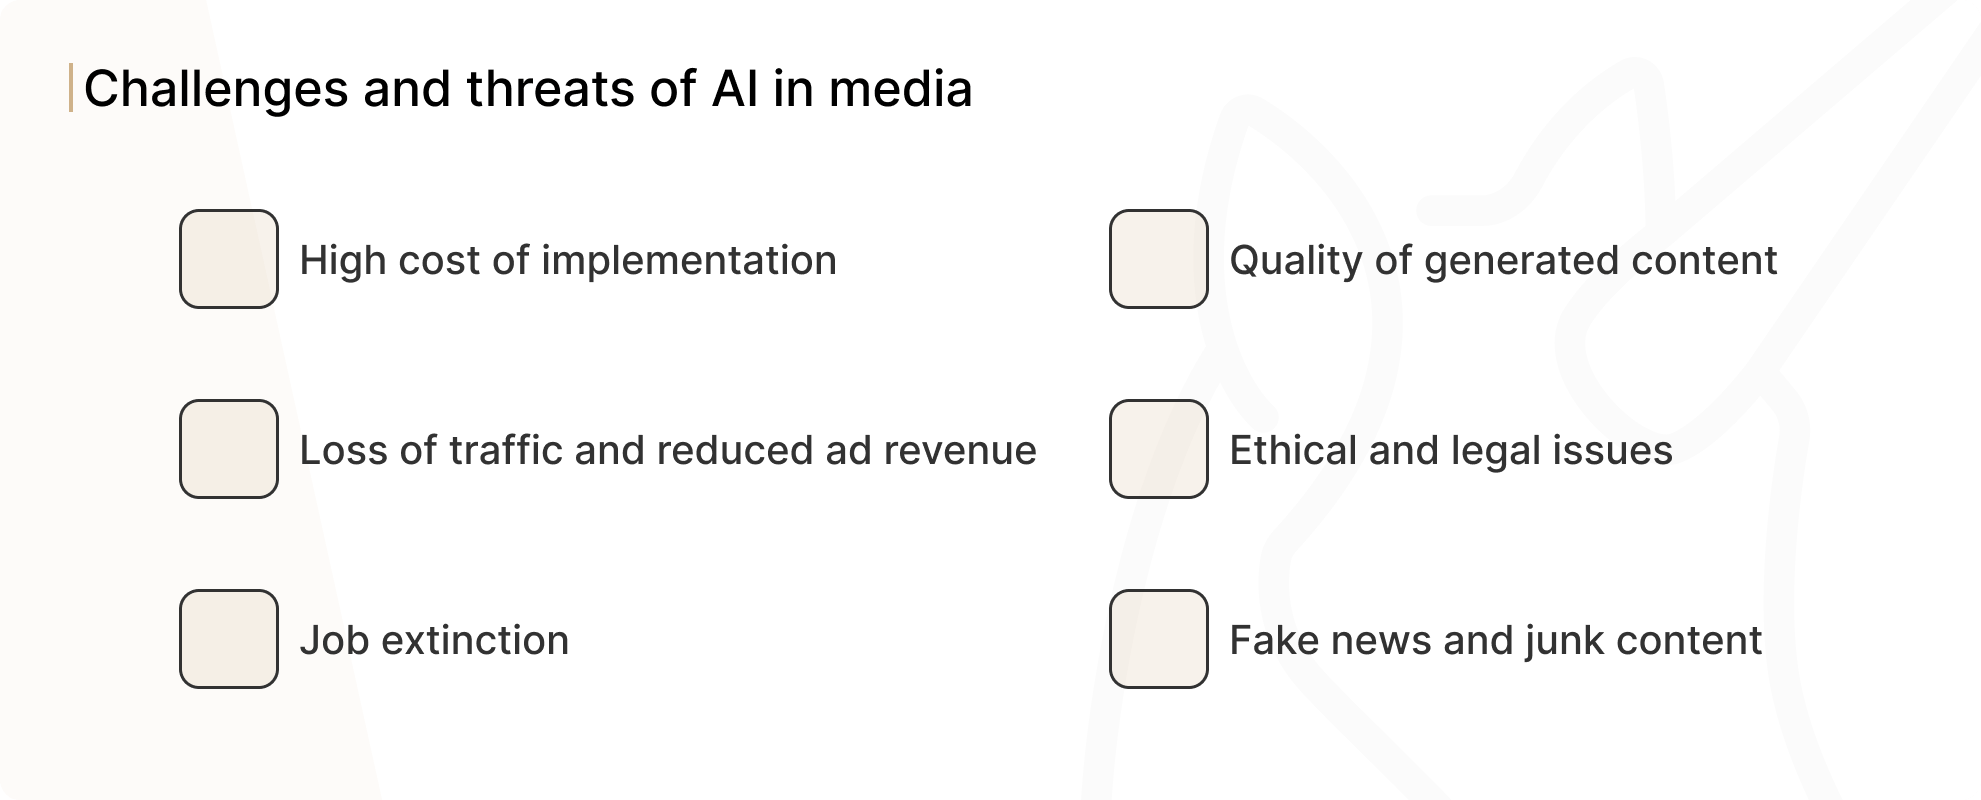 Challenges and threats of AI in media